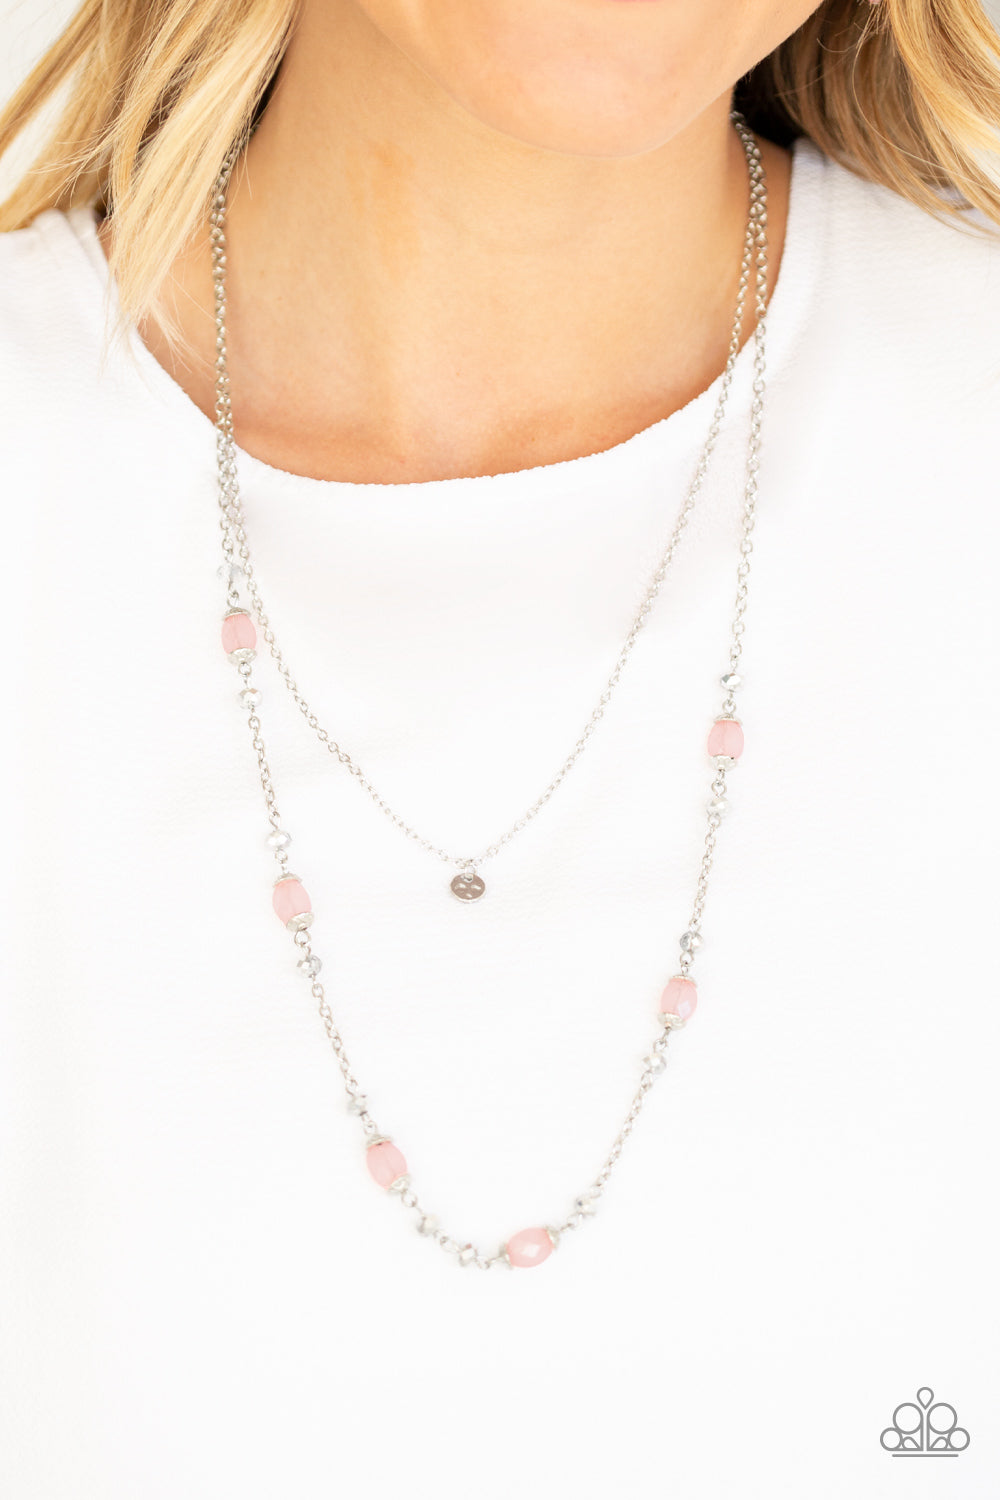 Irresistibly Iridescent Pink Necklace